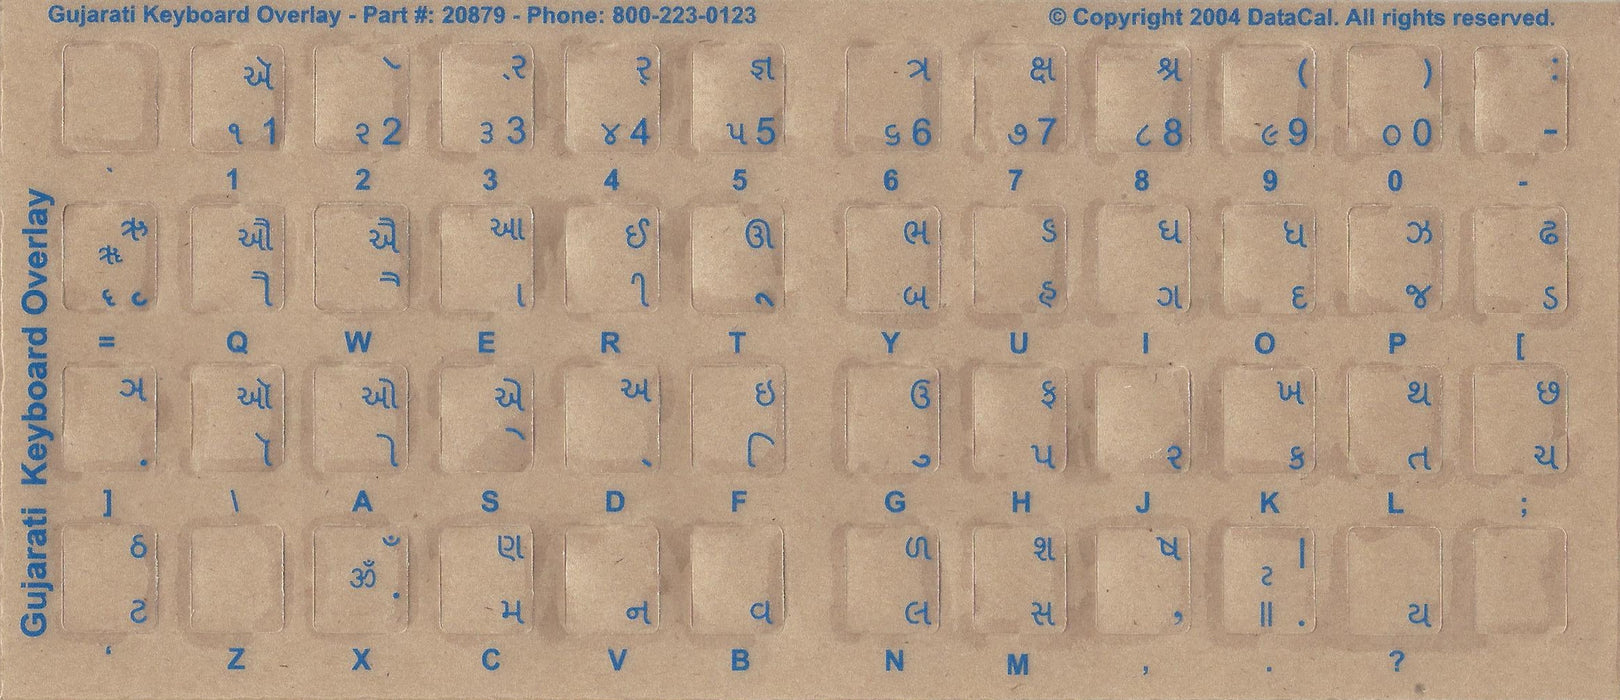 Gujarati Keyboard Stickers - Labels - Overlays with Blue Characters for White or Ivory Keyboard